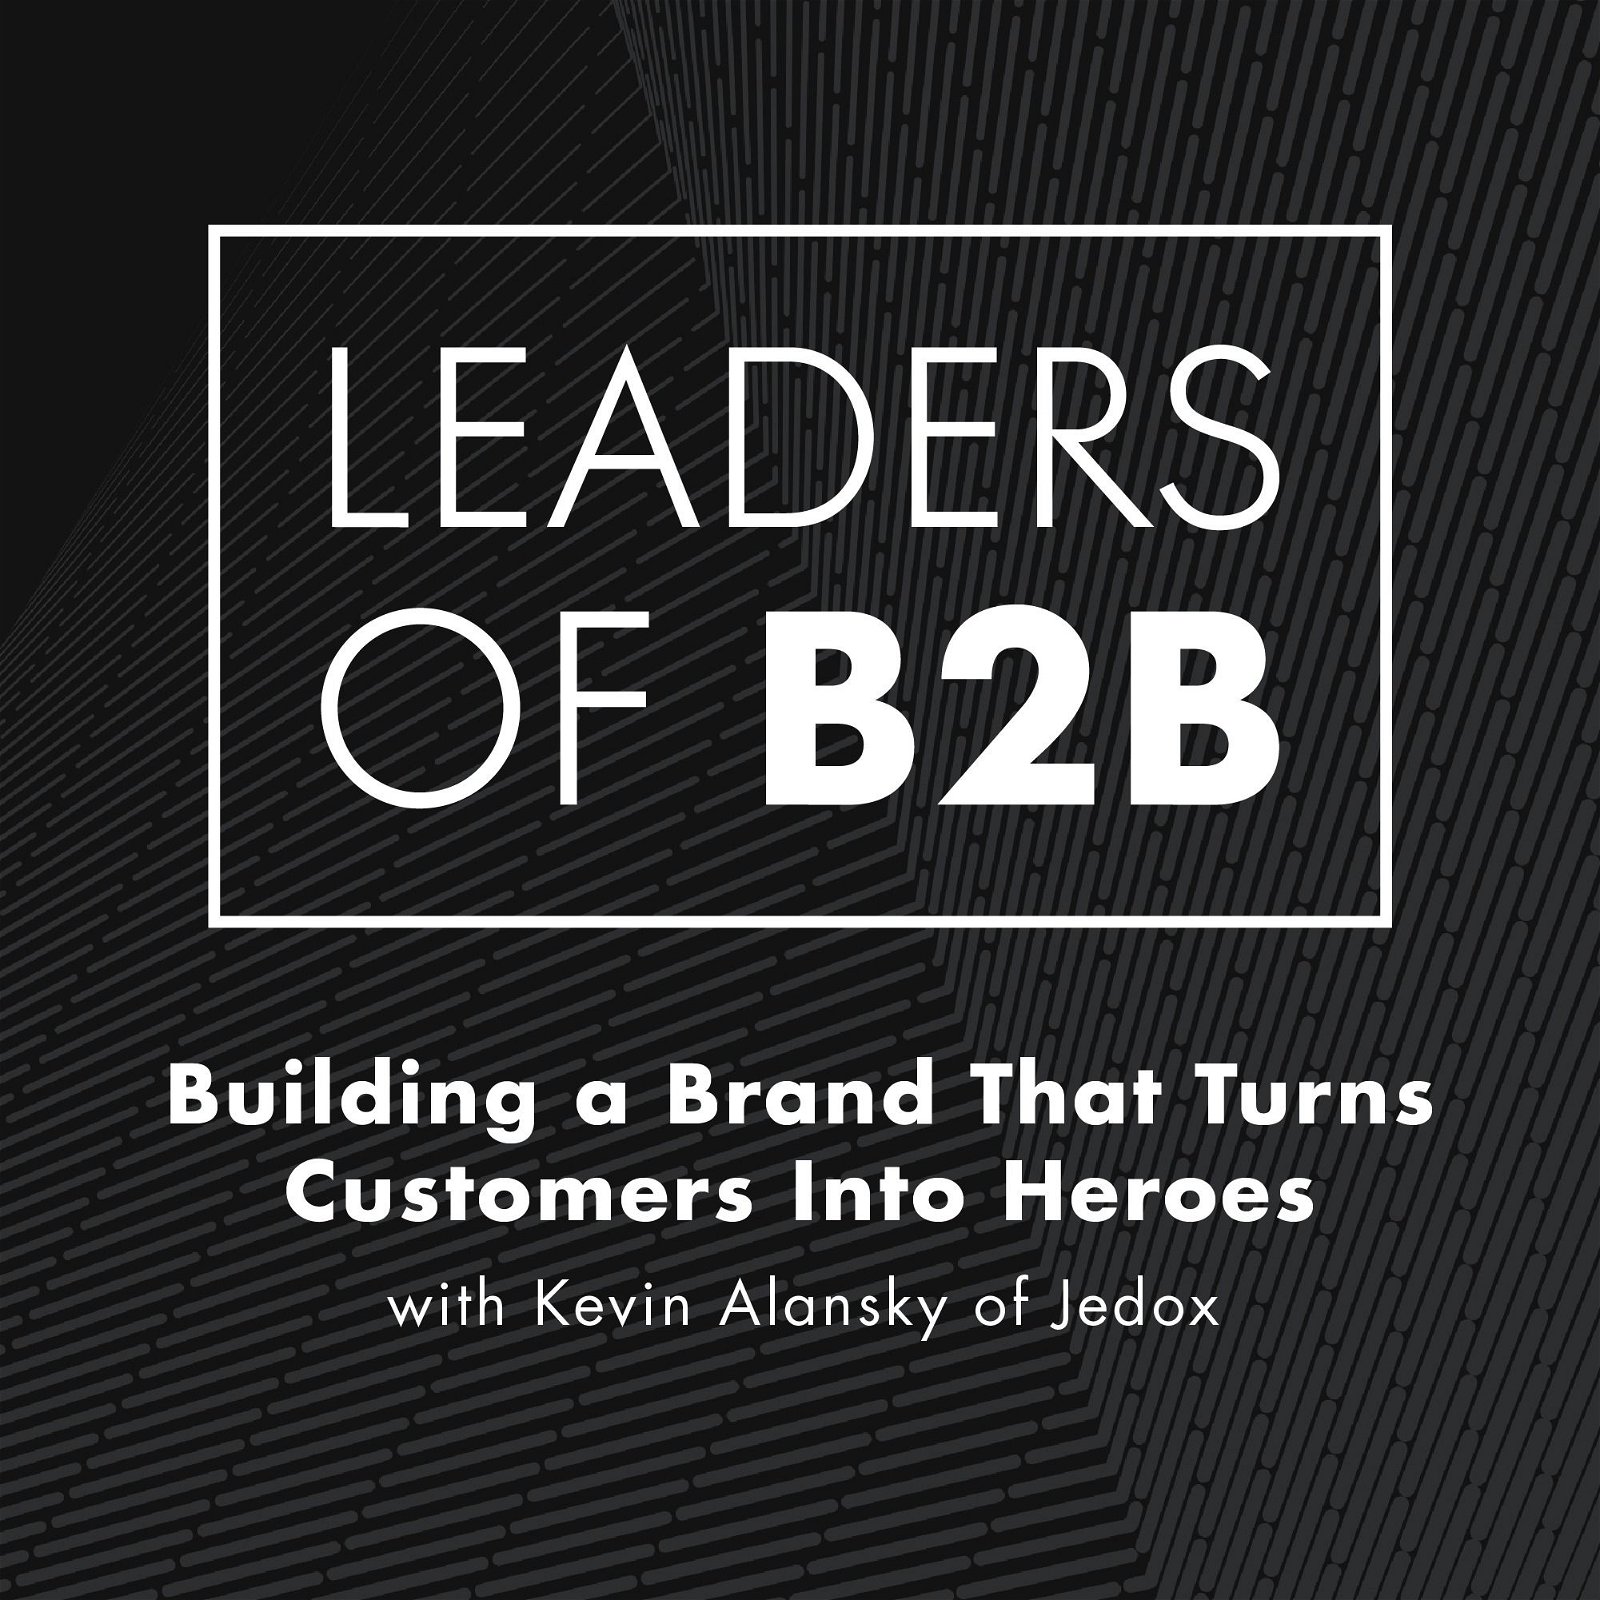 Building a Brand That Turns Customers Into Heroes with Kevin Alansky of Jedox